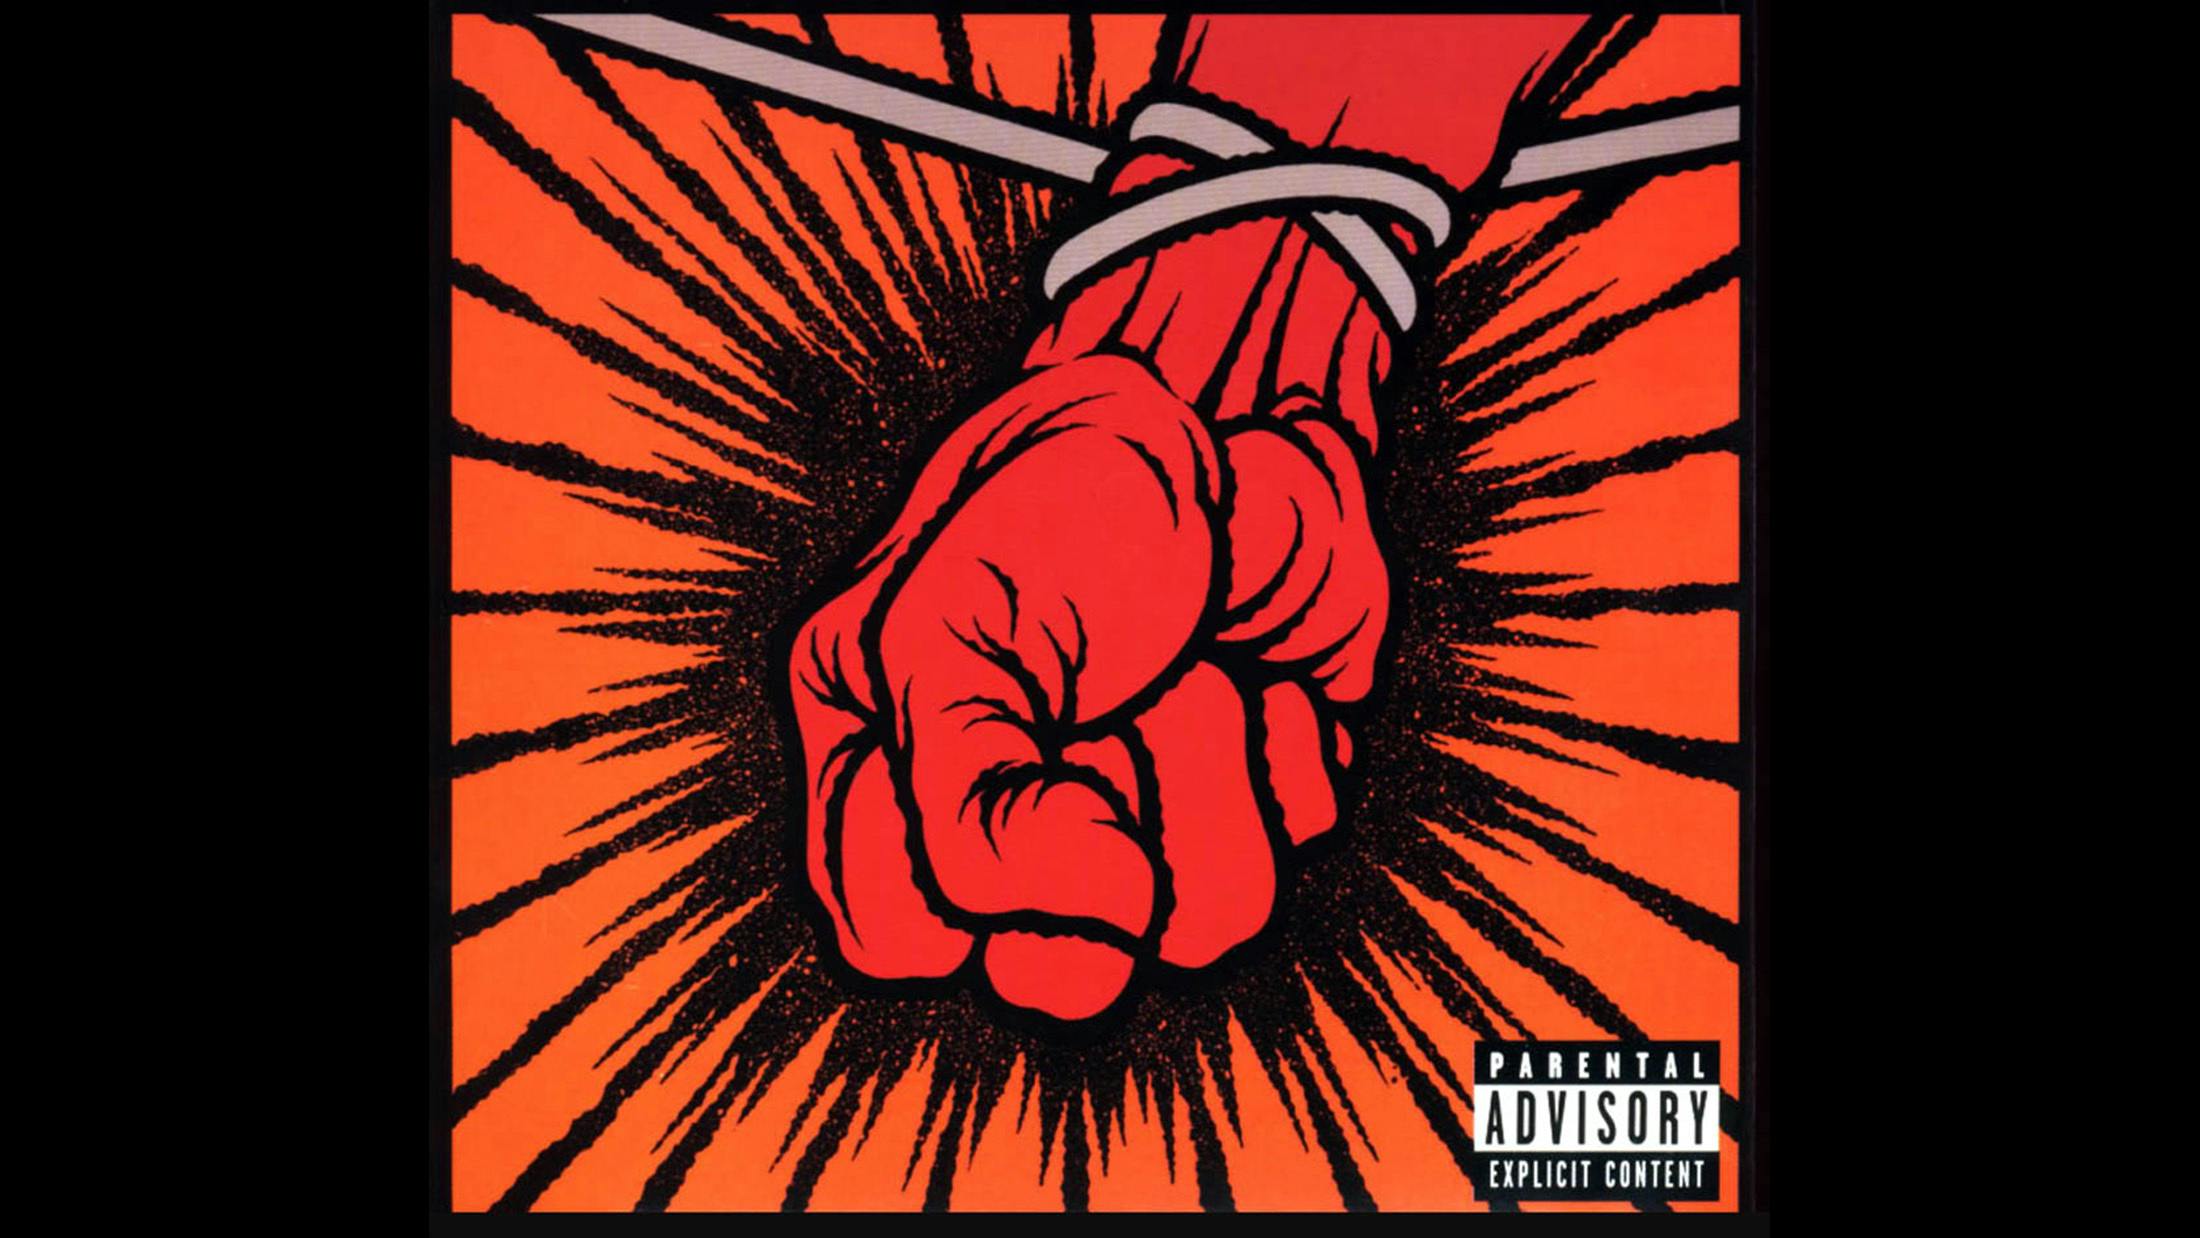 What, after all these years, is there left to say about Metallica’s most infuriating album? We’ve seen the documentary [2004’s Some Kind Of Monster], we’ve read the think pieces, and we’ve heard that controversial snare sound. So derided at the time of its release that some fans considered it an elaborate prank, listening to it today its easy to forget what all the fuss was about. You can’t knock a release that sees a band you’d suspected had lost their mojo, playing passionately, even if it sounds like a bloody mess at various points.